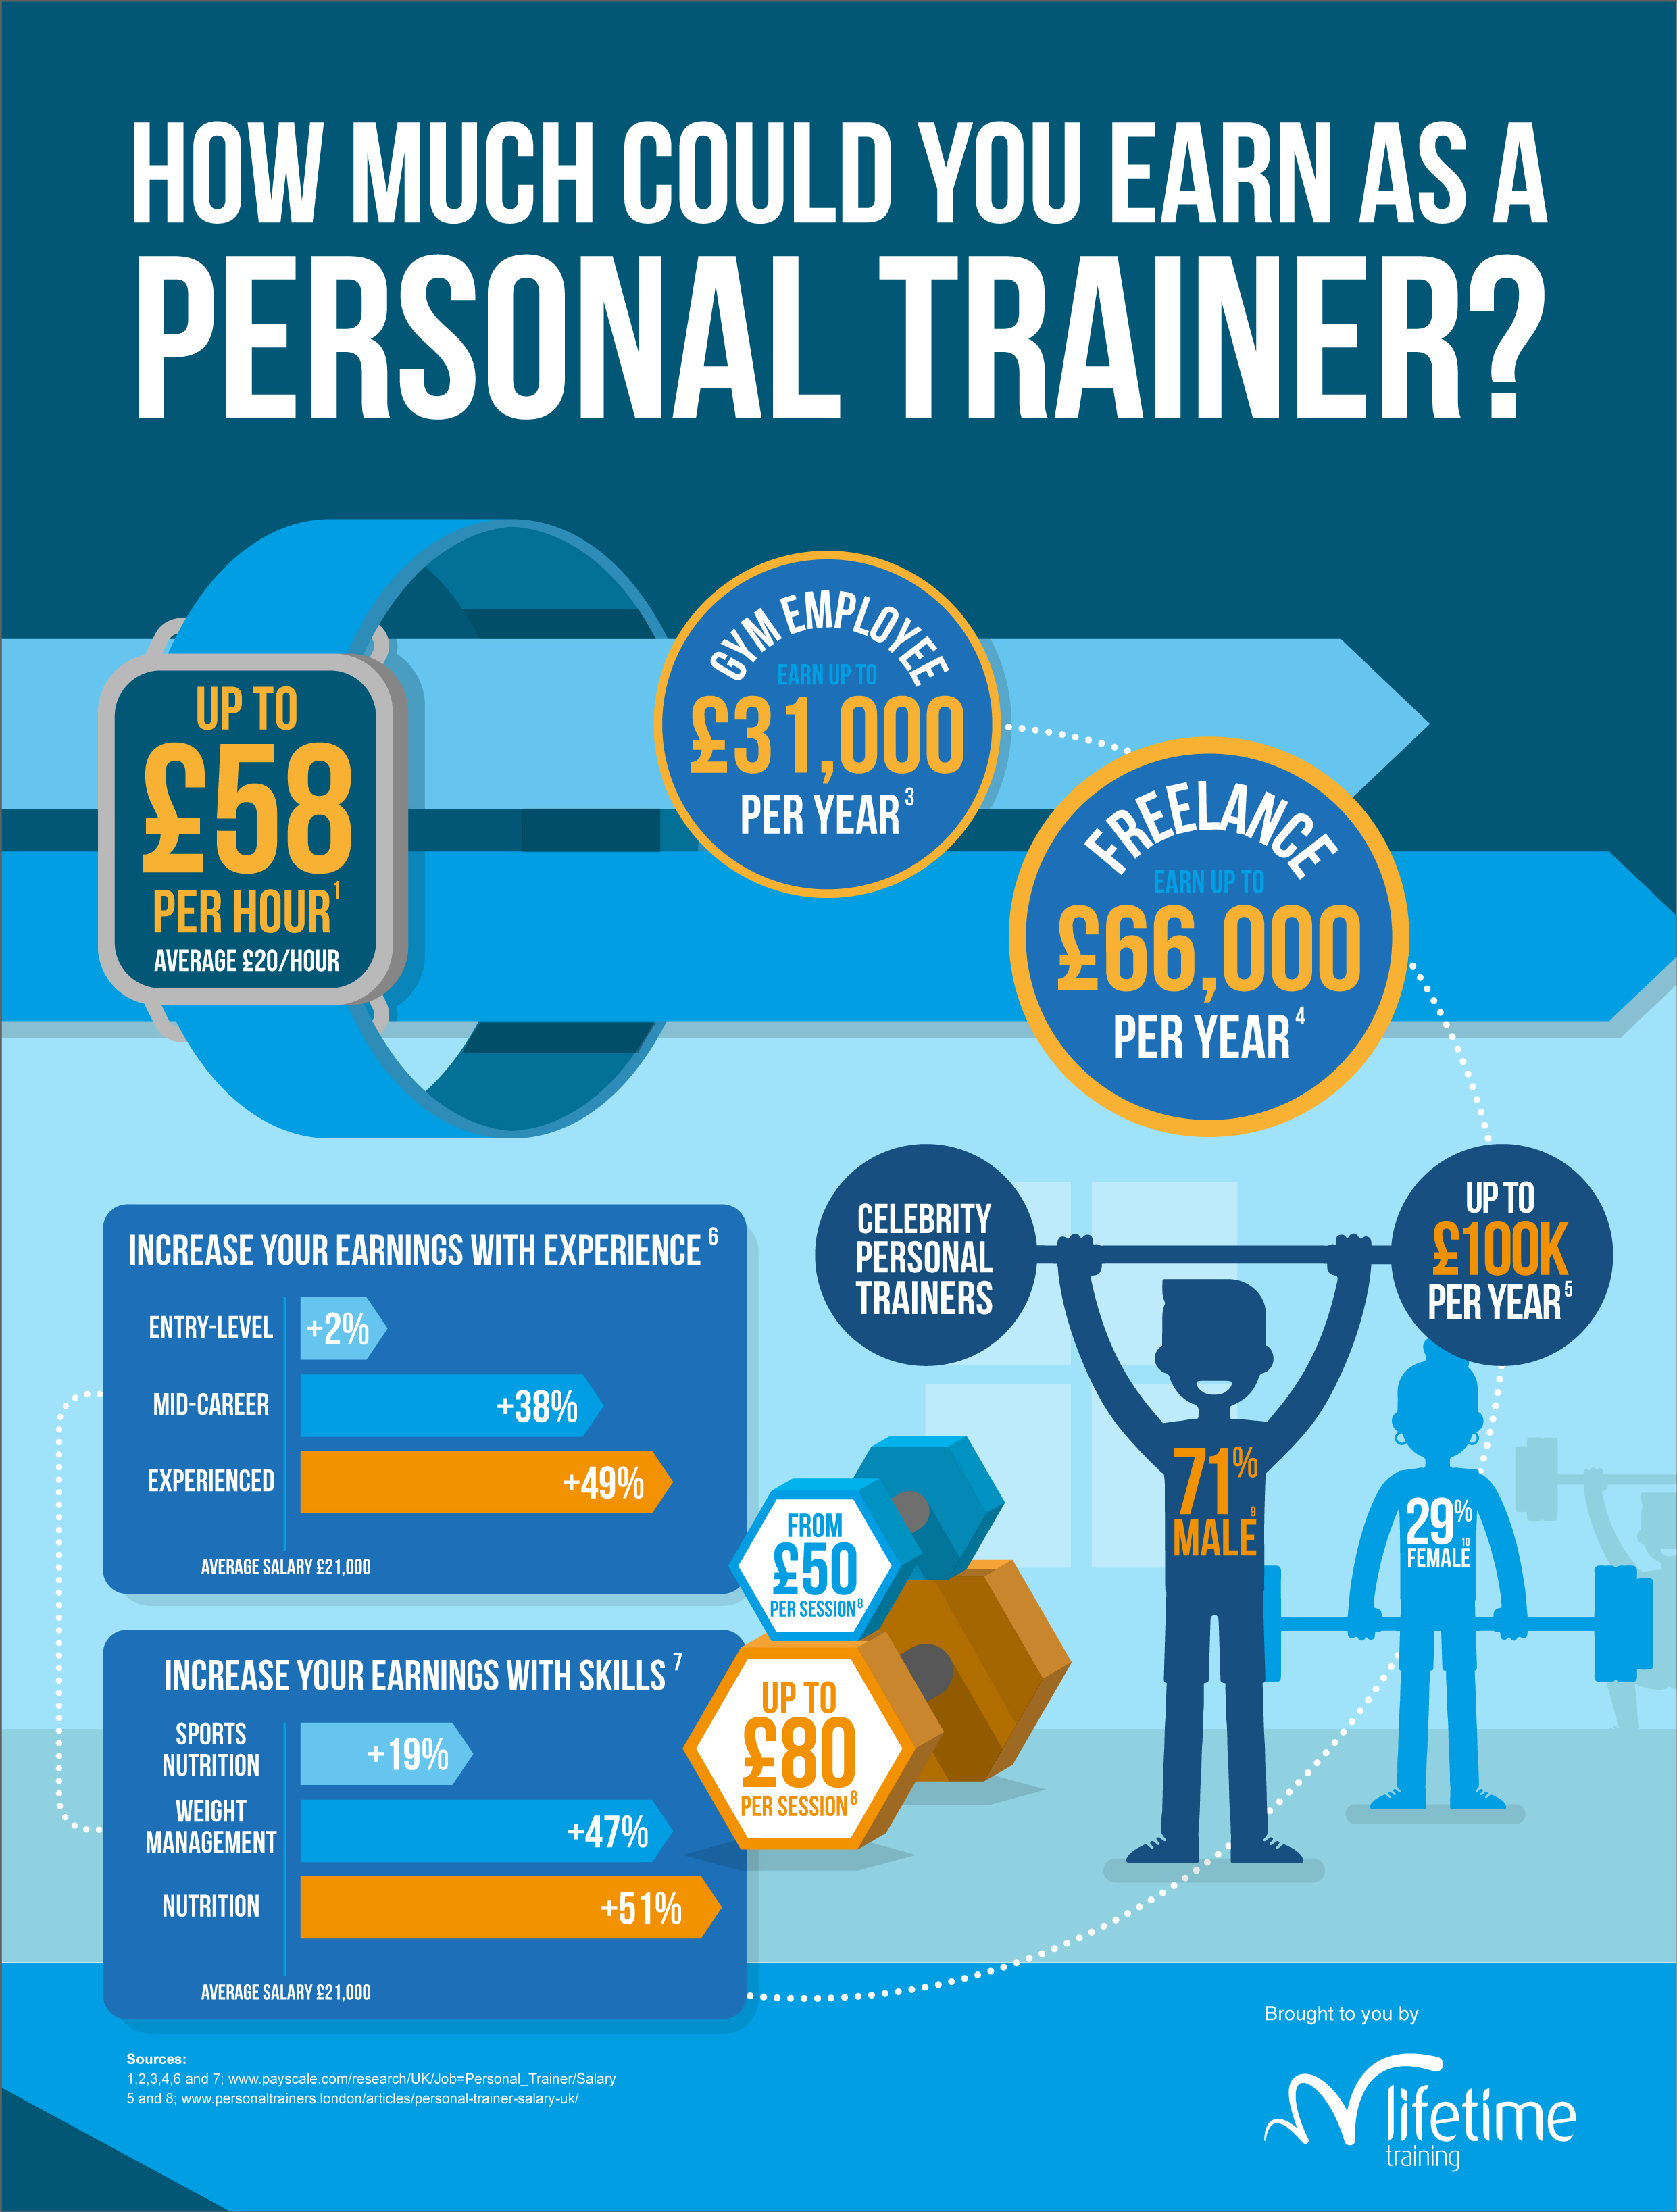 How Much Could You Earn as a Personal Trainer? Infographic